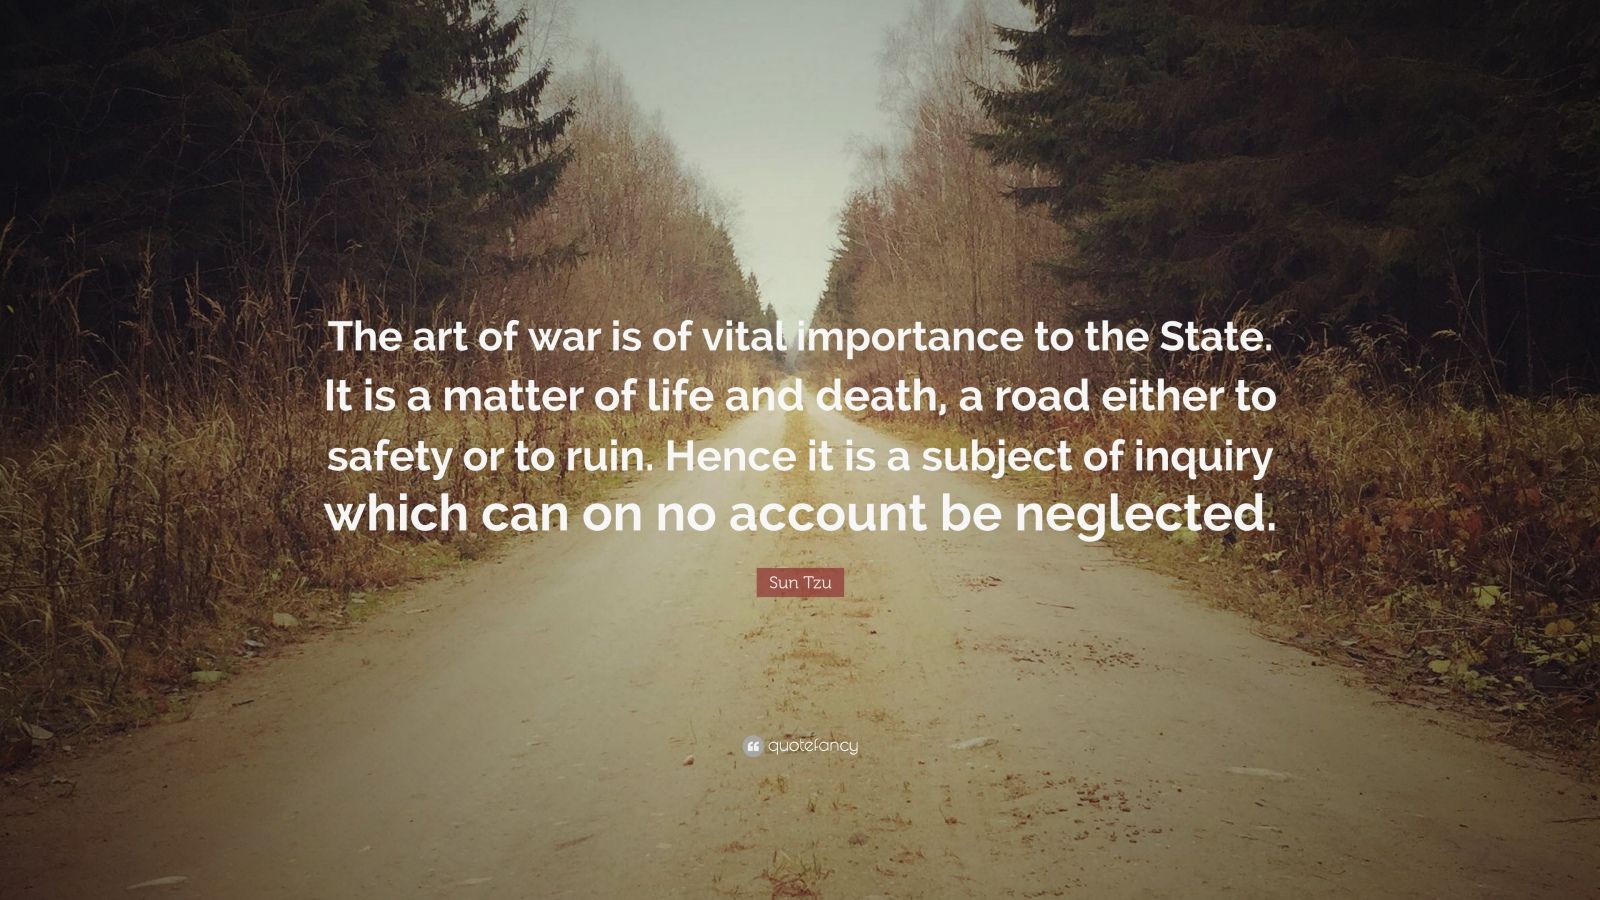 Sun Tzu Quote: “The art of war is of vital importance to the State. It